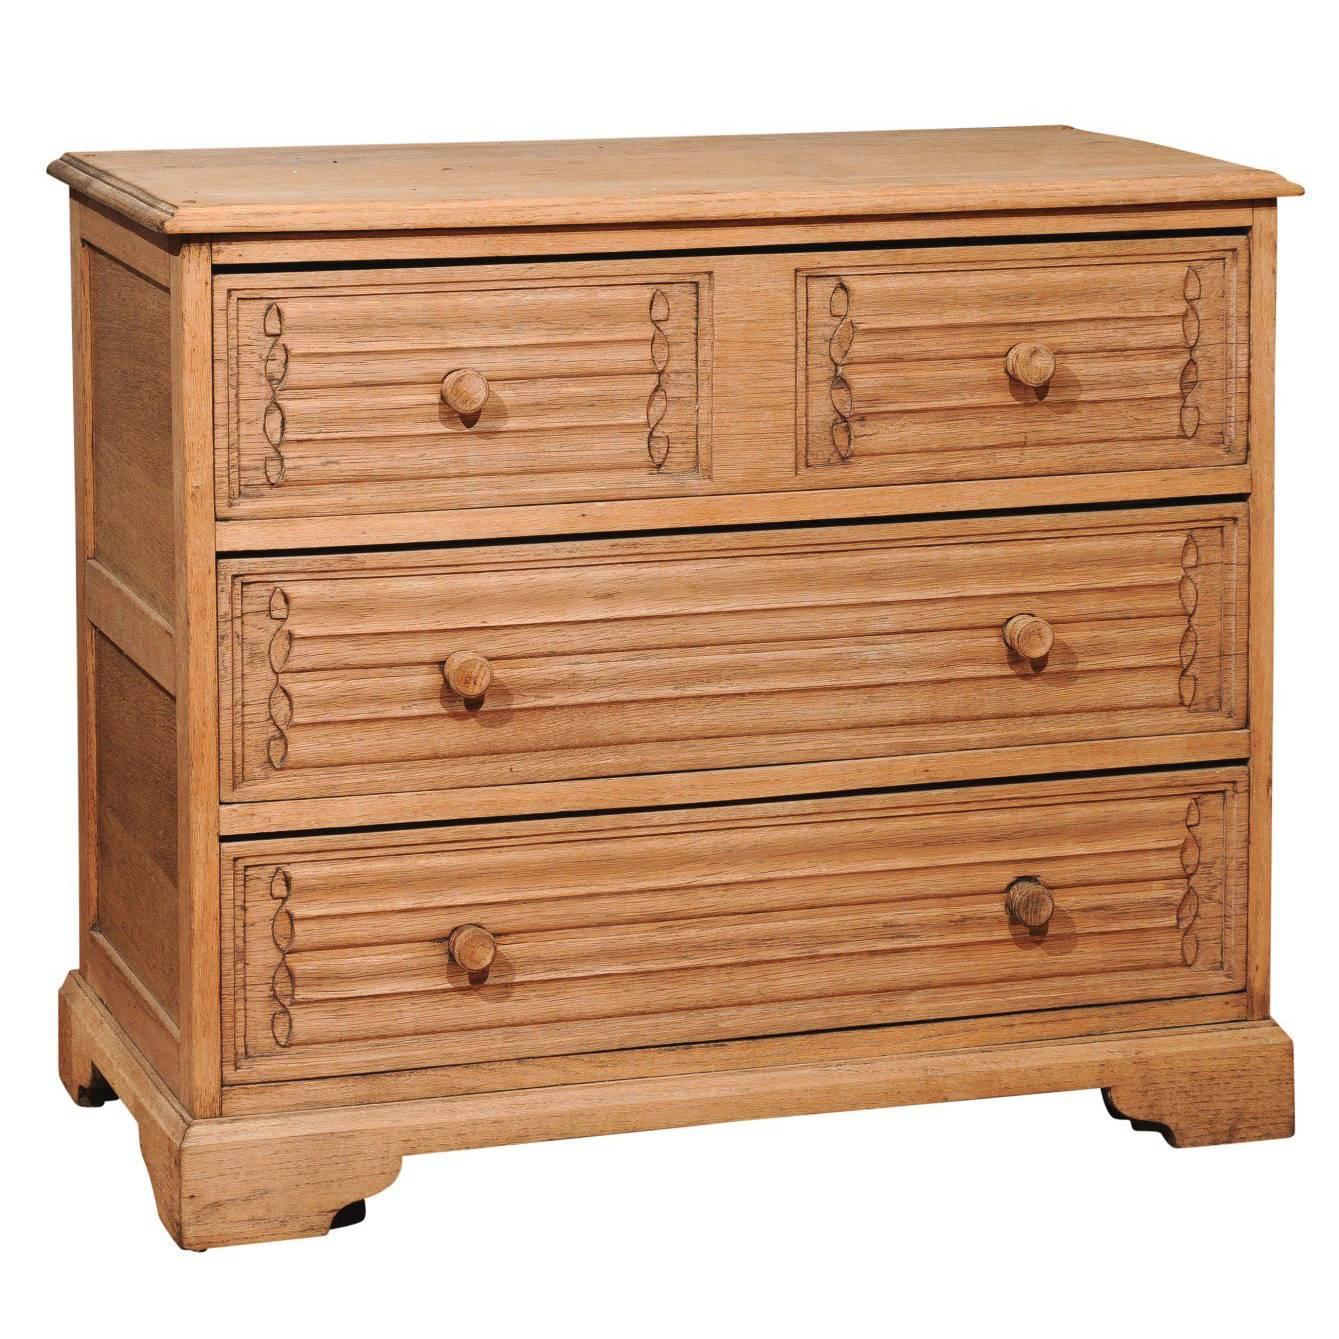 English Late 19th Century Oak Three-Drawer Chest with Natural Finish